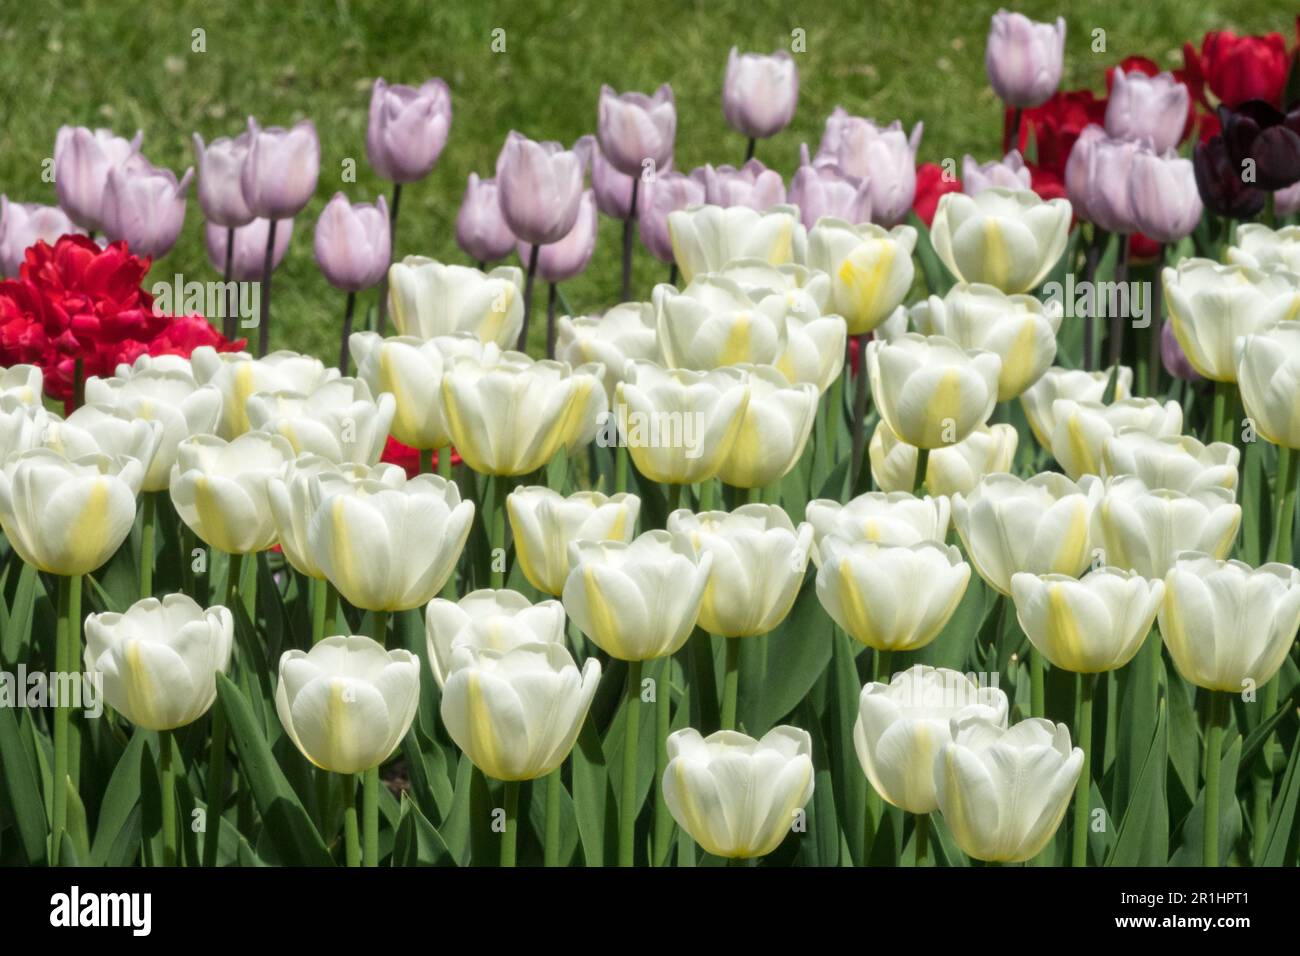 Mixed, White Tulips, Cup-shaped, Fragrant, Single Late Tulip, Opened, Tulipa 'Angels Wish', Display, Garden Yellow White Pink Red Colour Stock Photo